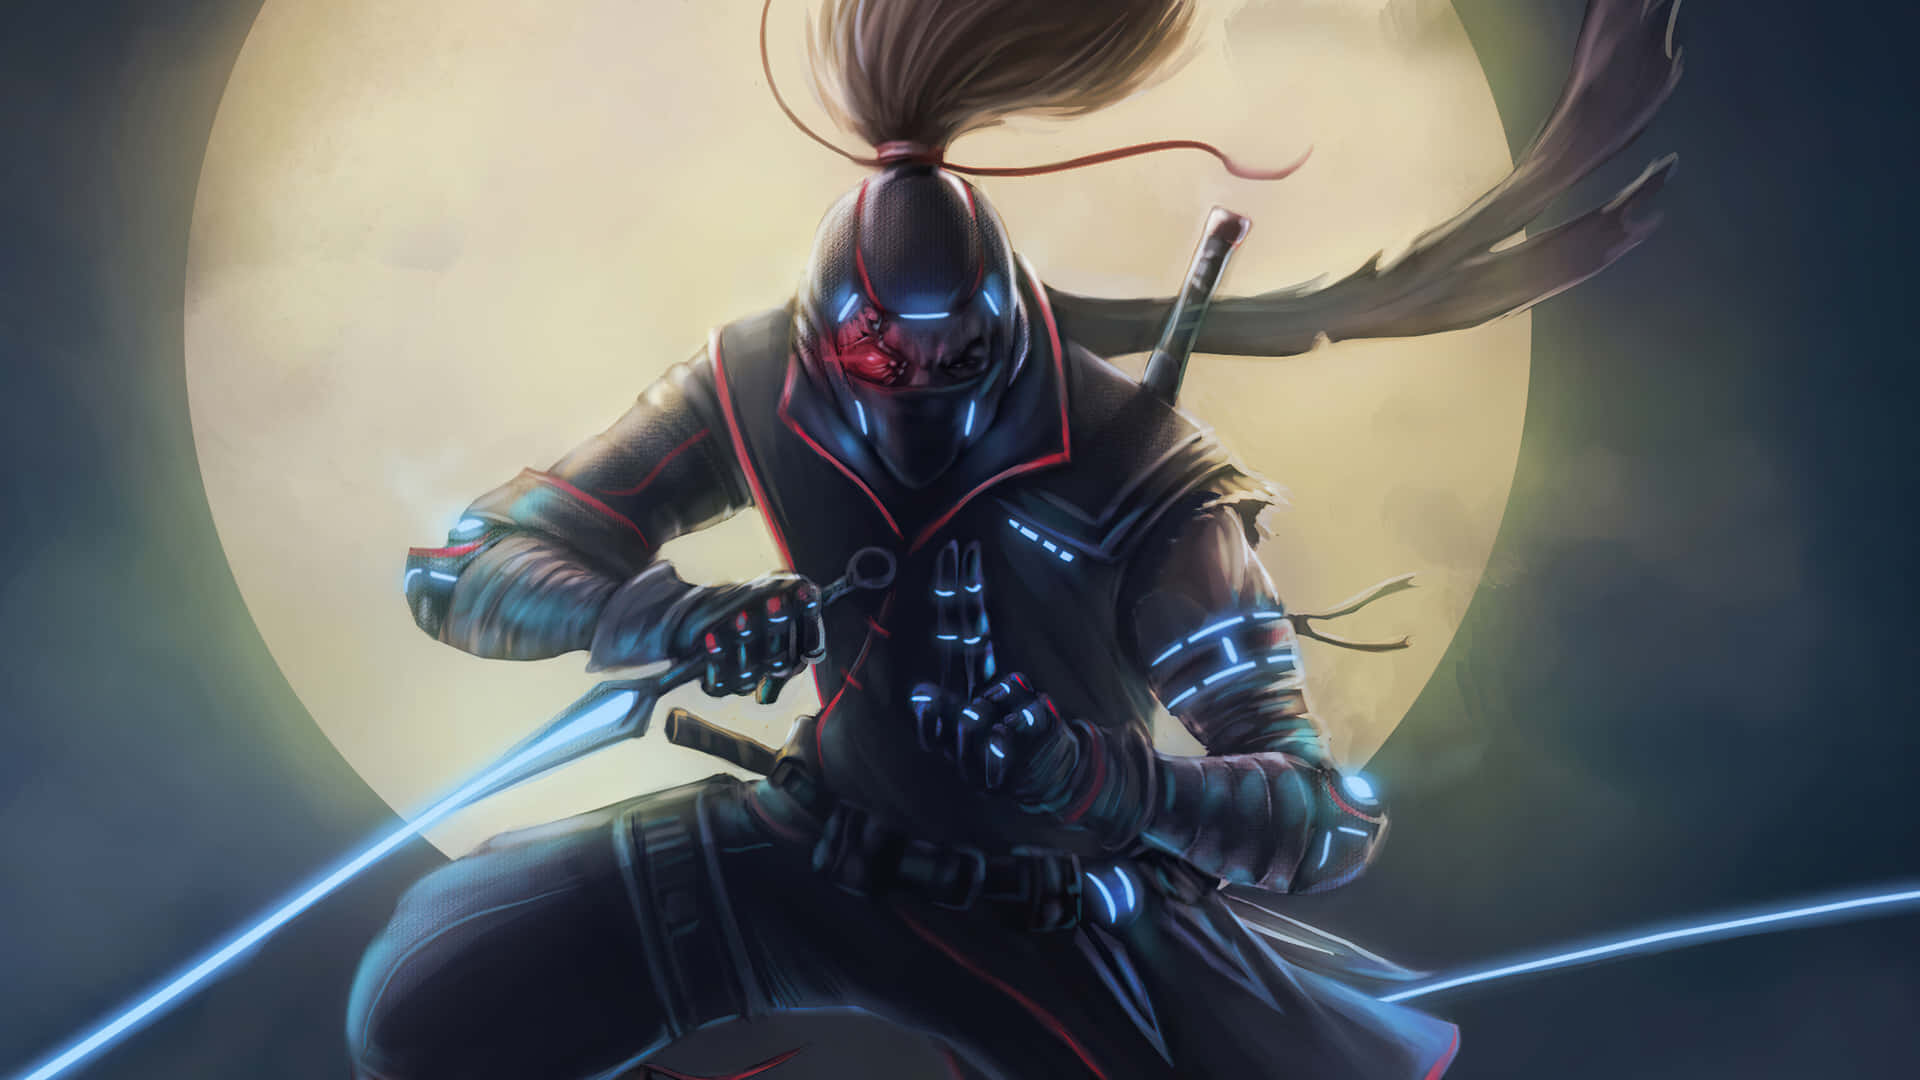 Cool Ninja In Armor At Full Moon Background